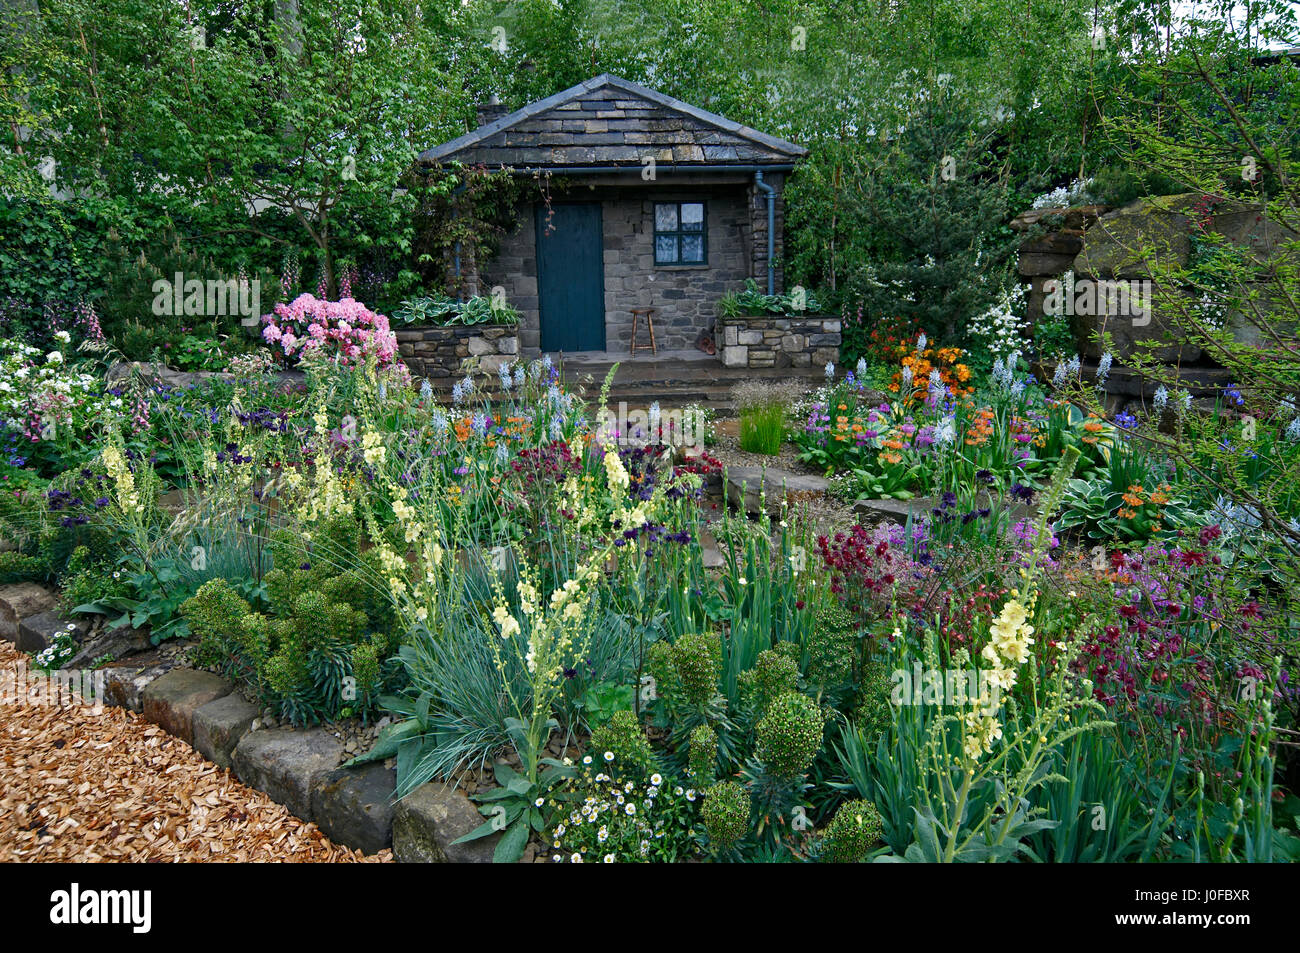 A country cottage and garden situated in a wooded rockery with a colourful display of flowers Stock Photo